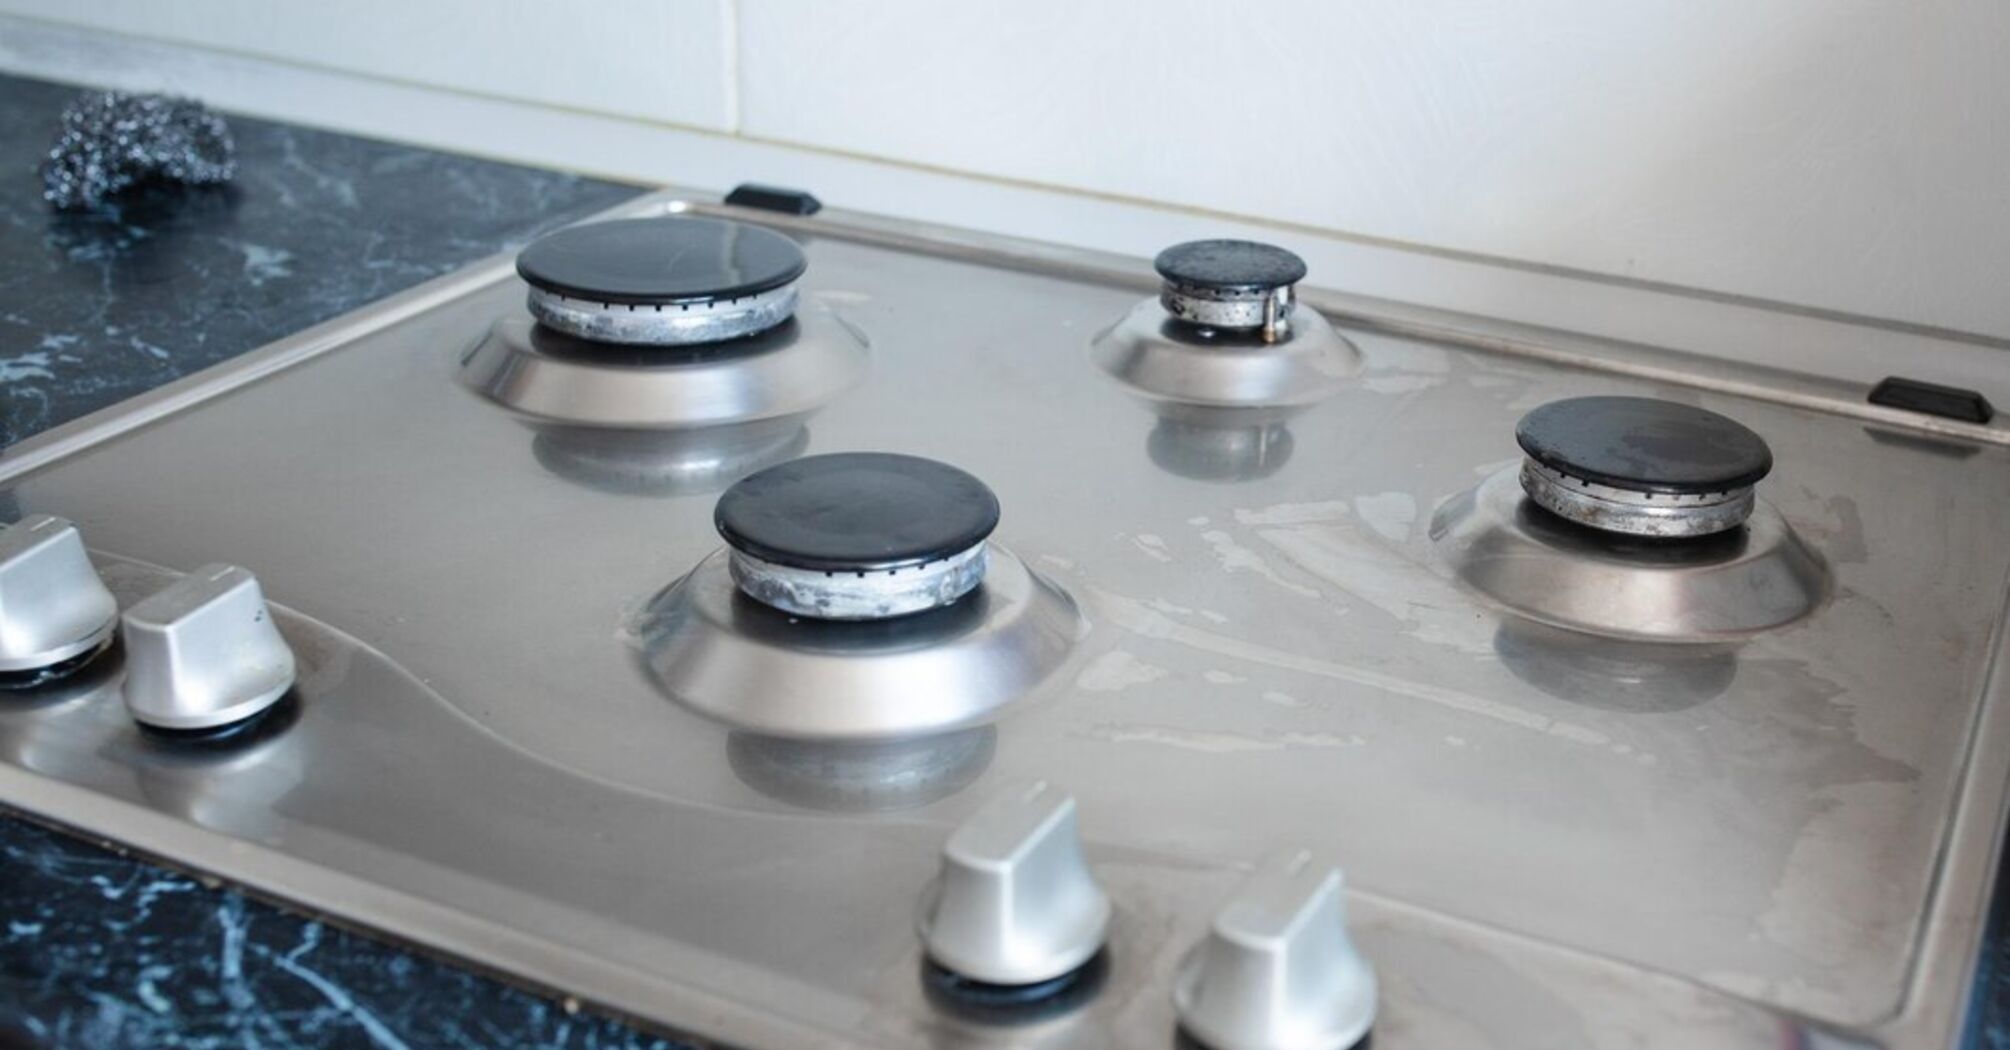 Ways to easily clean gas stove handles